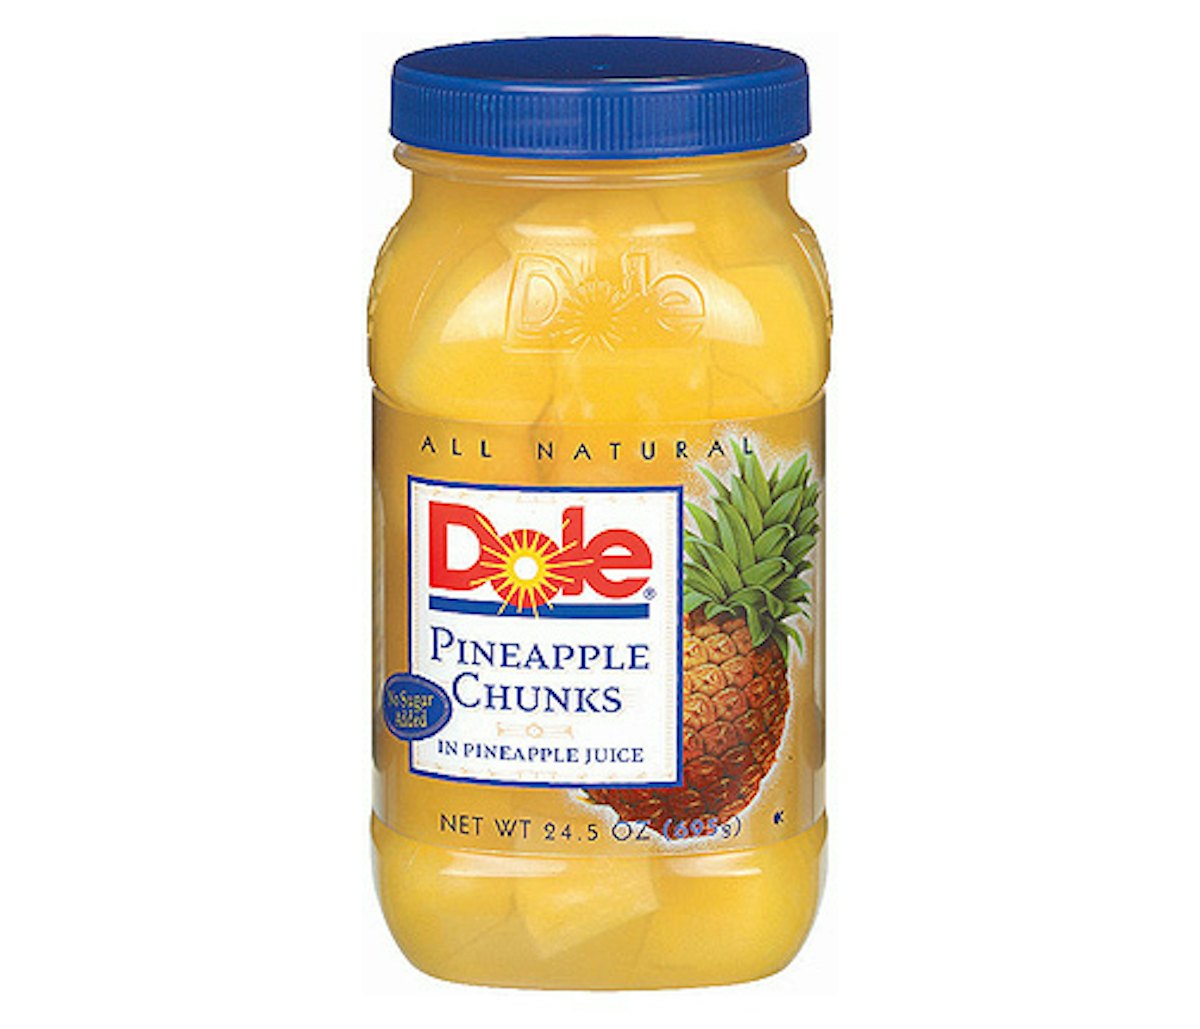 Dole launches fruitful size | Packaging World